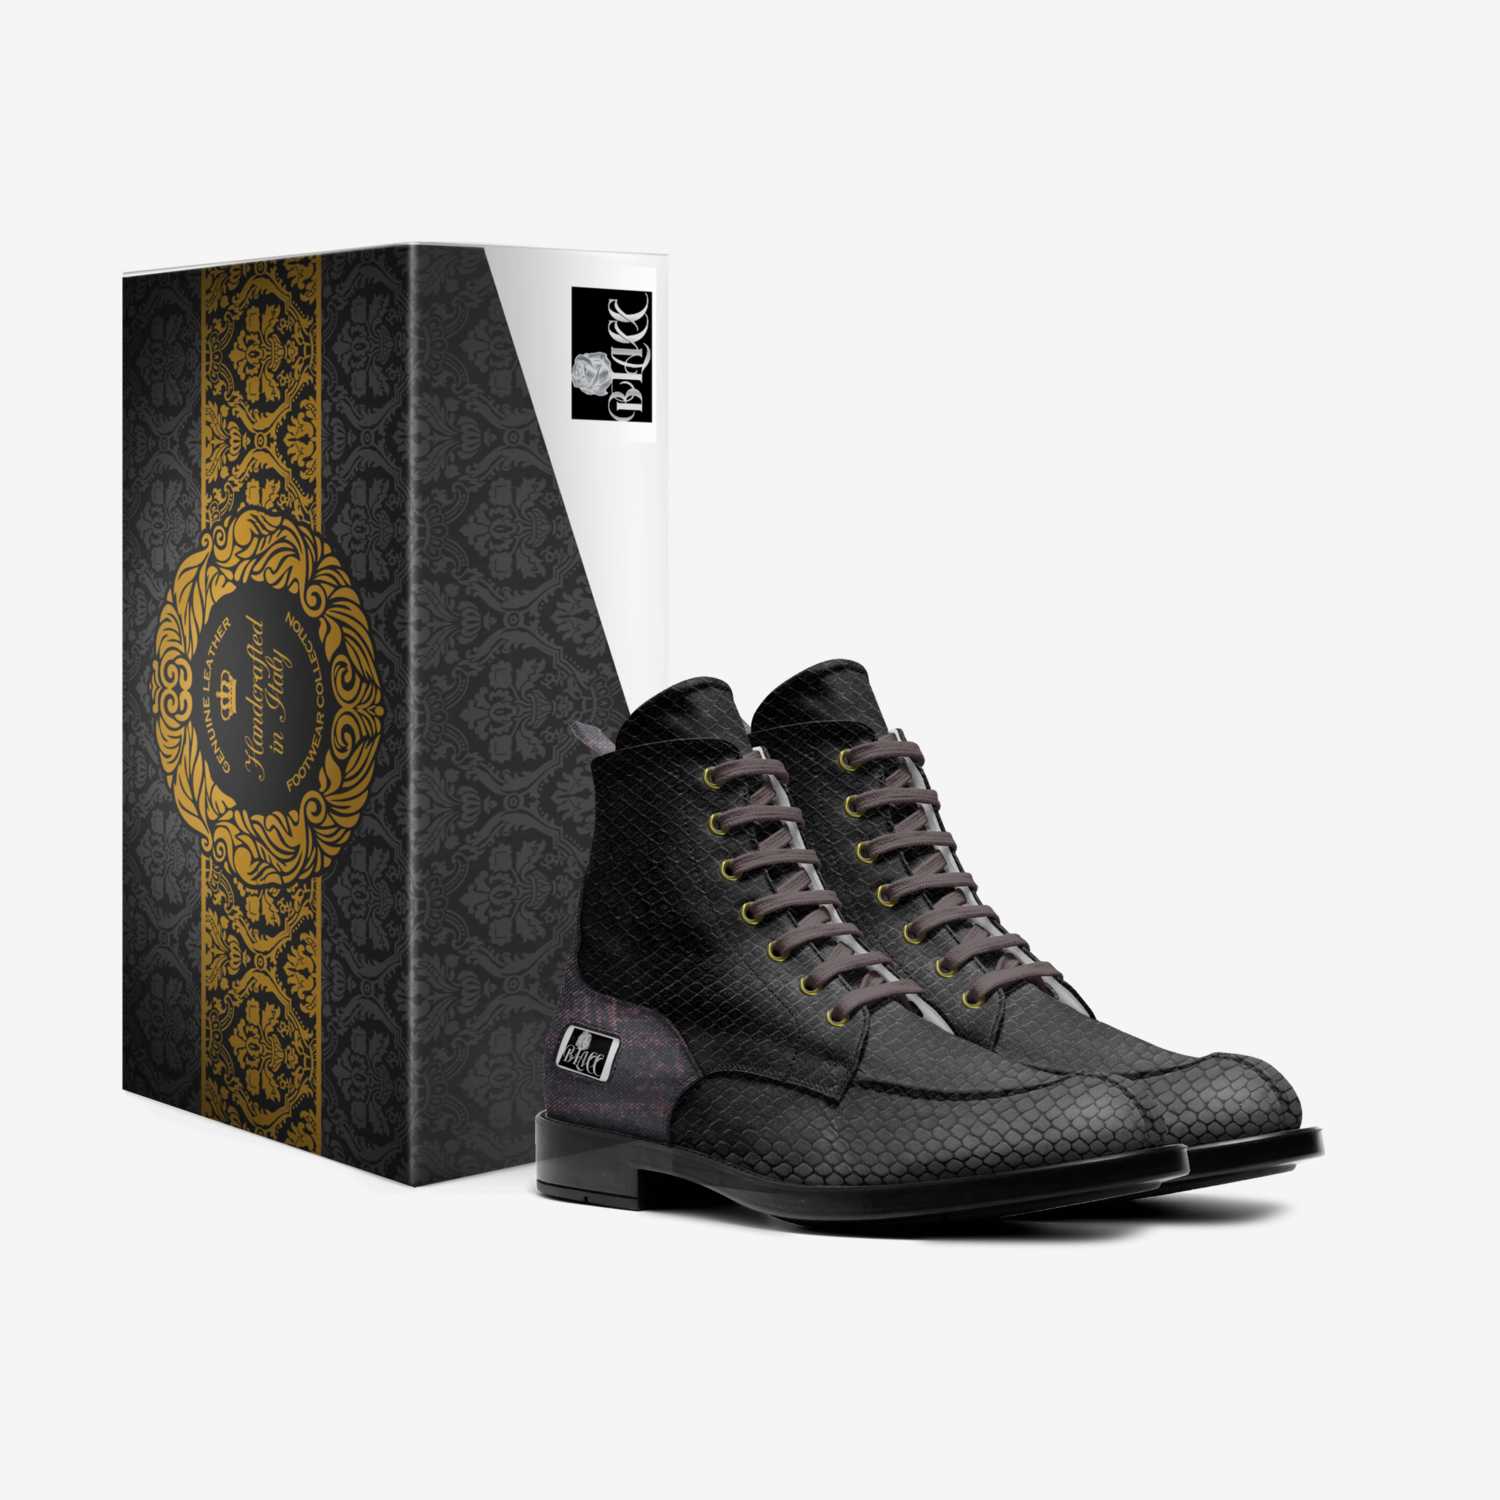 BLACC custom made in Italy shoes by Andrew Hudson | Box view